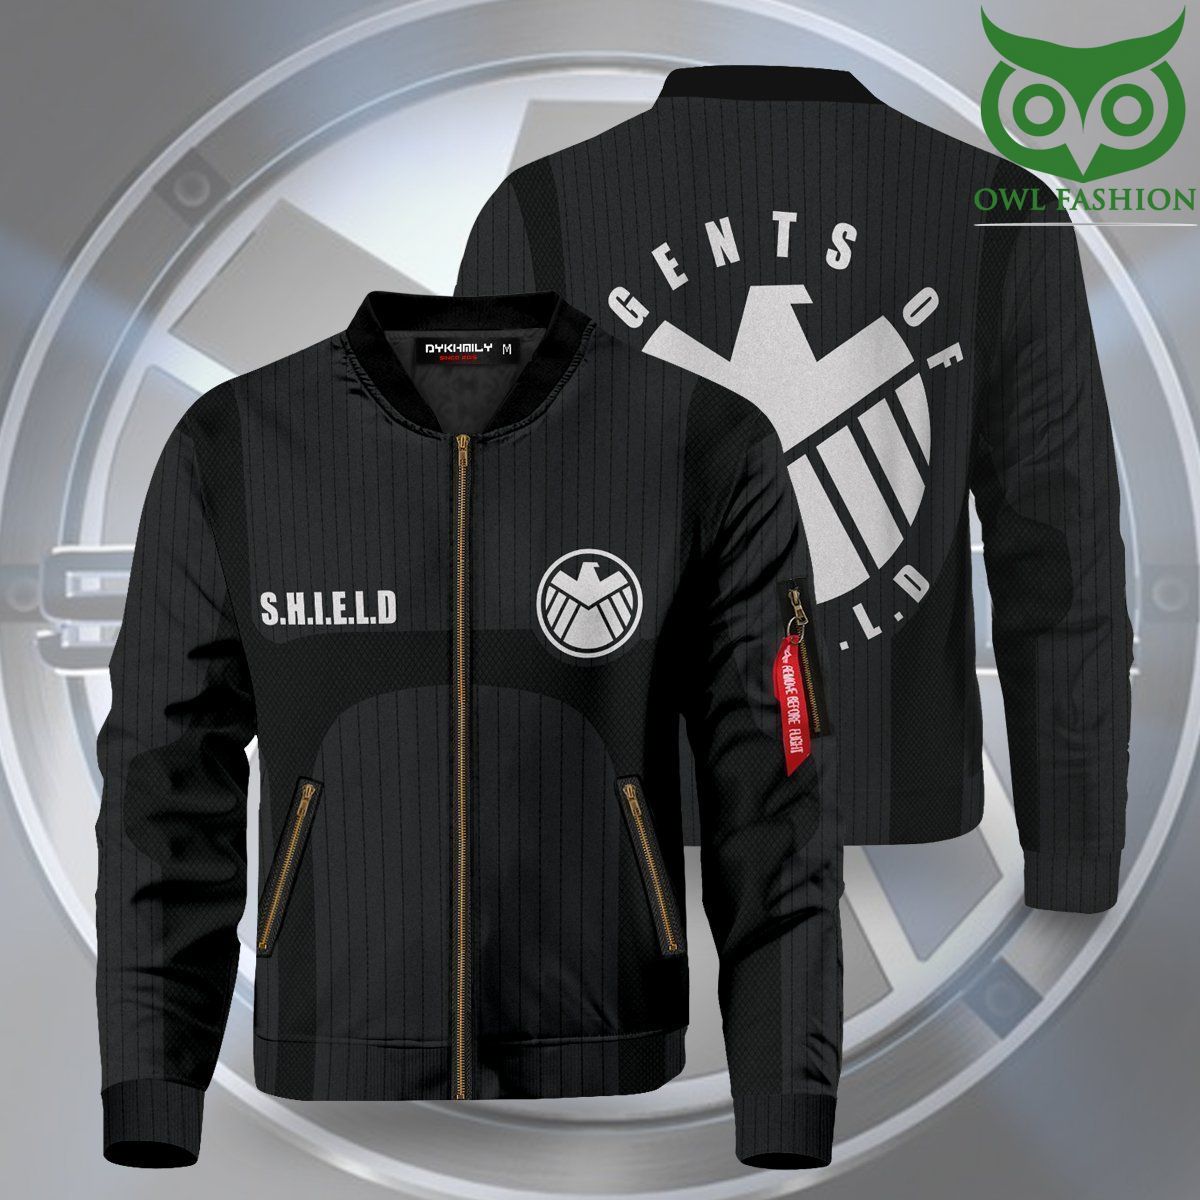 Agents of SHIELD Printed Bomber Jacket